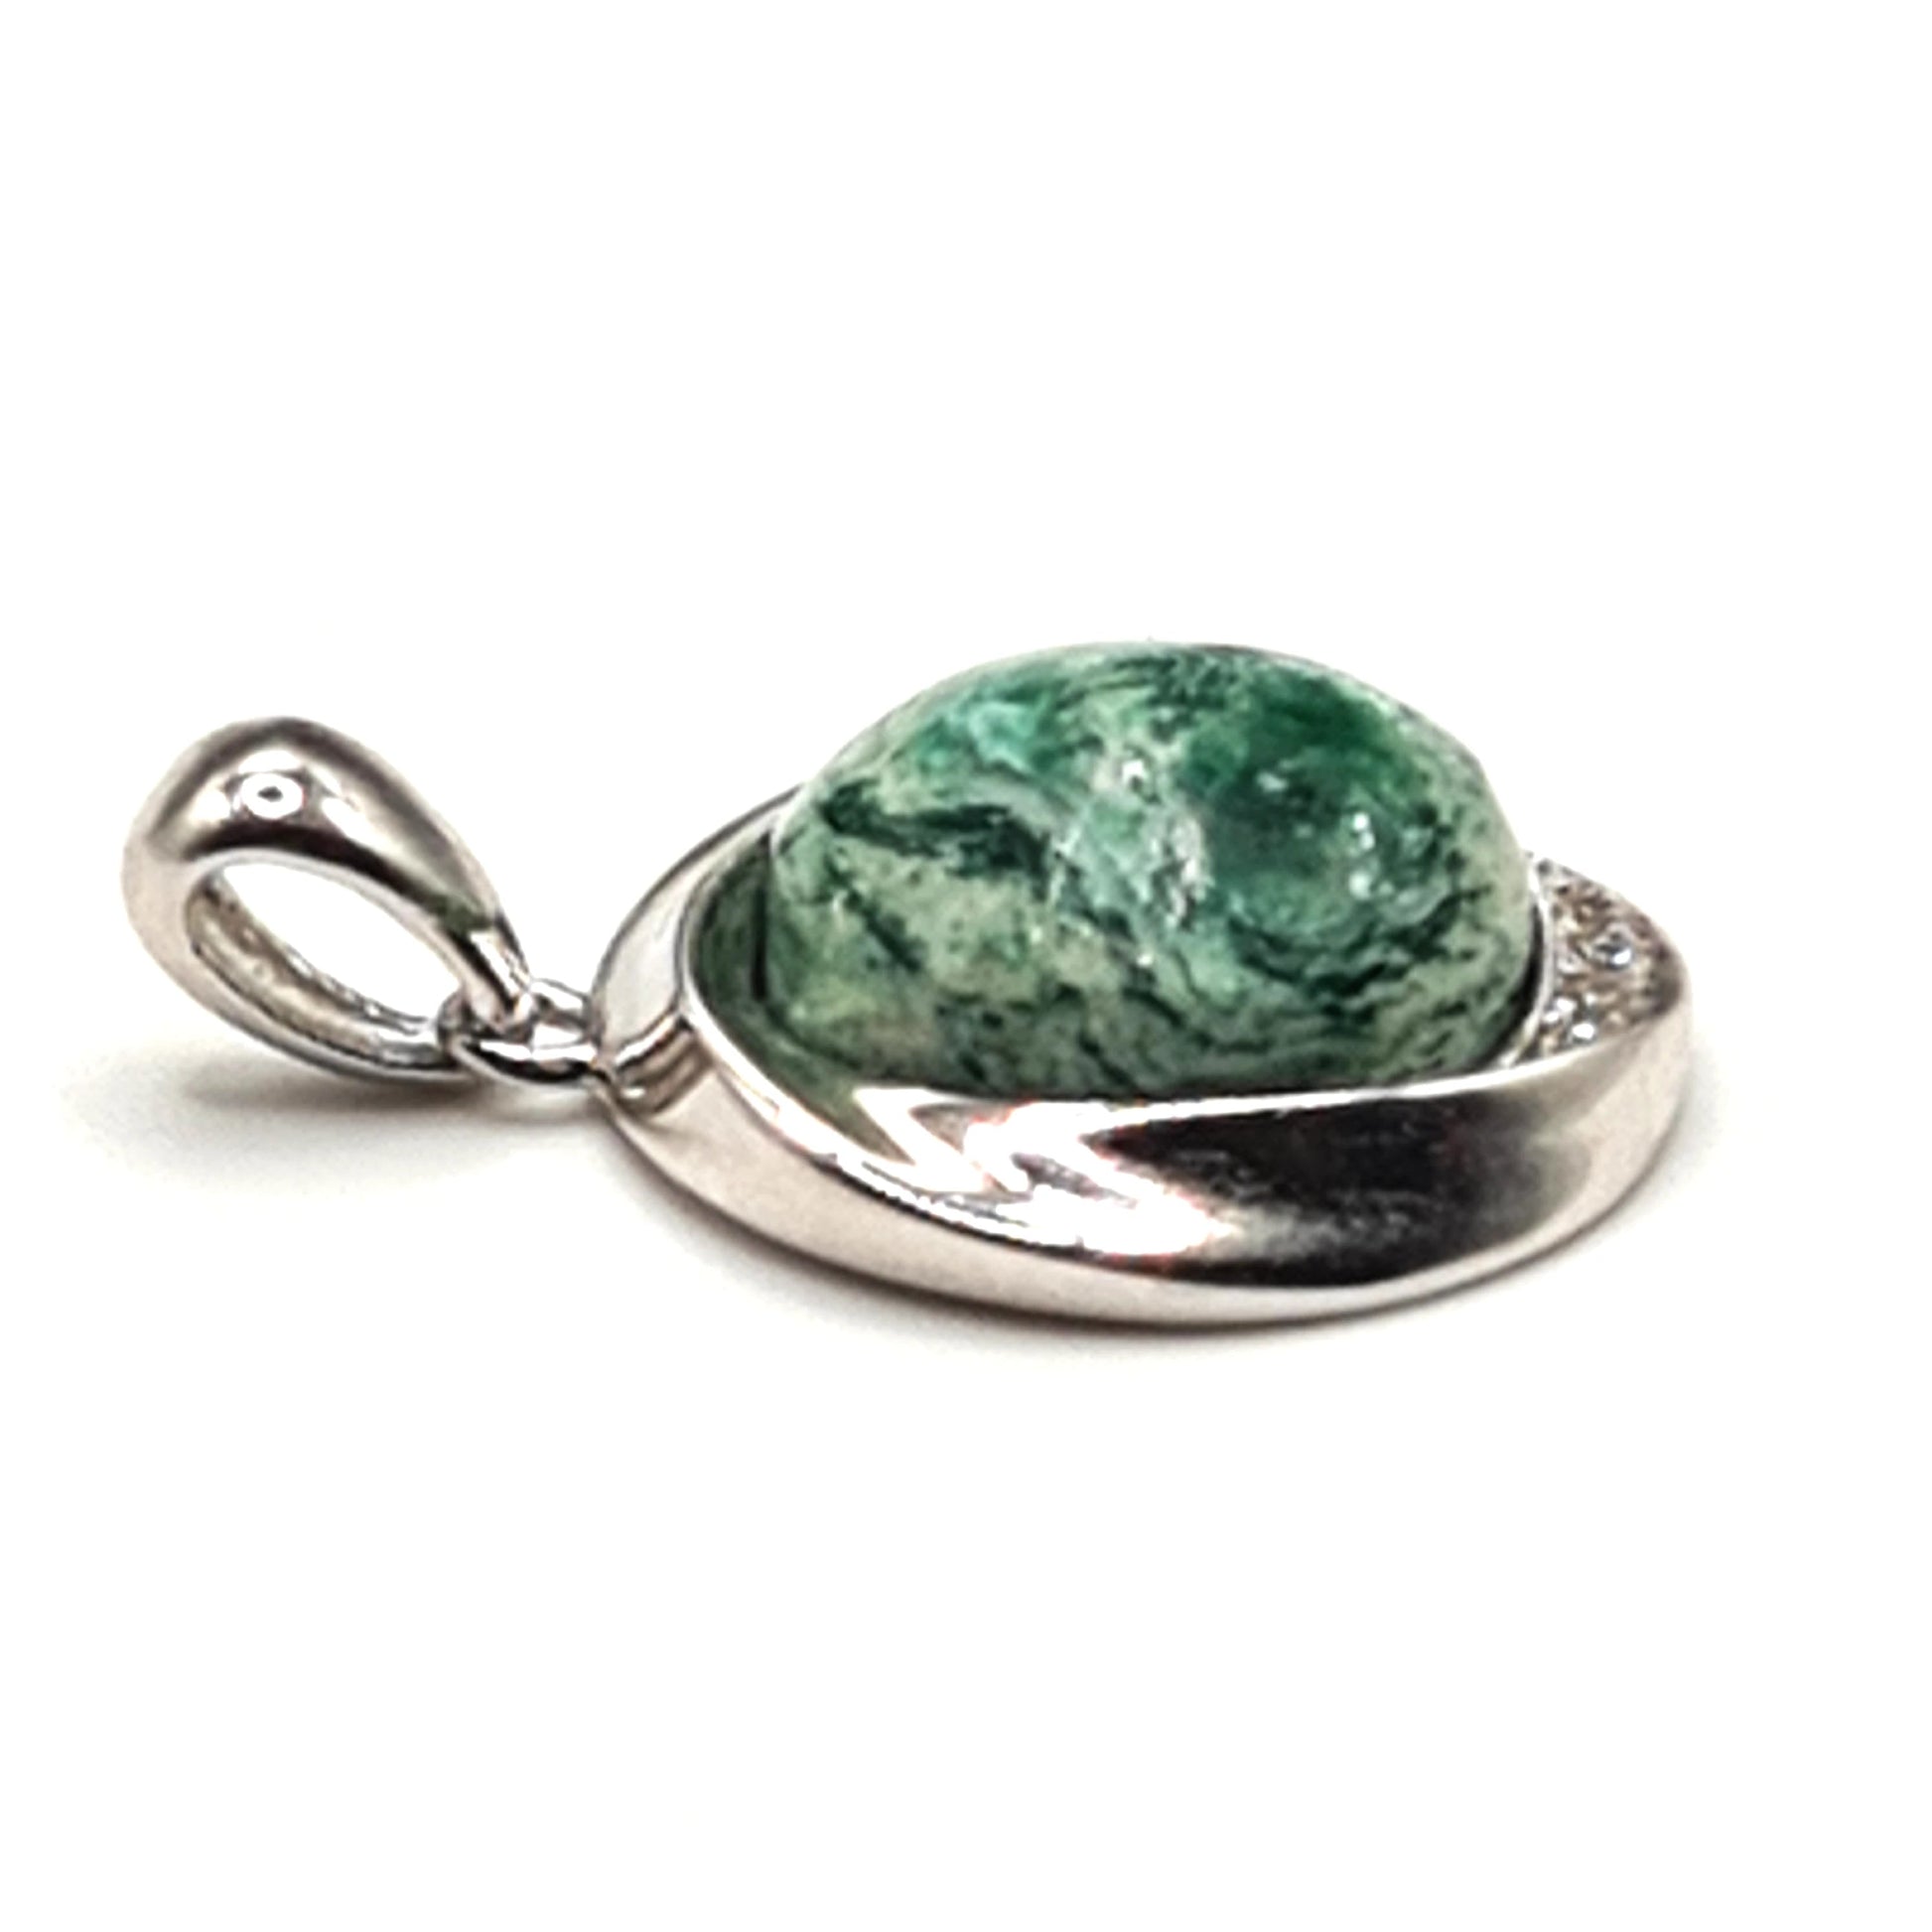 925 sterling silver pendant with 12mm round fuchsite and zirconia Scandinavian Gem Design